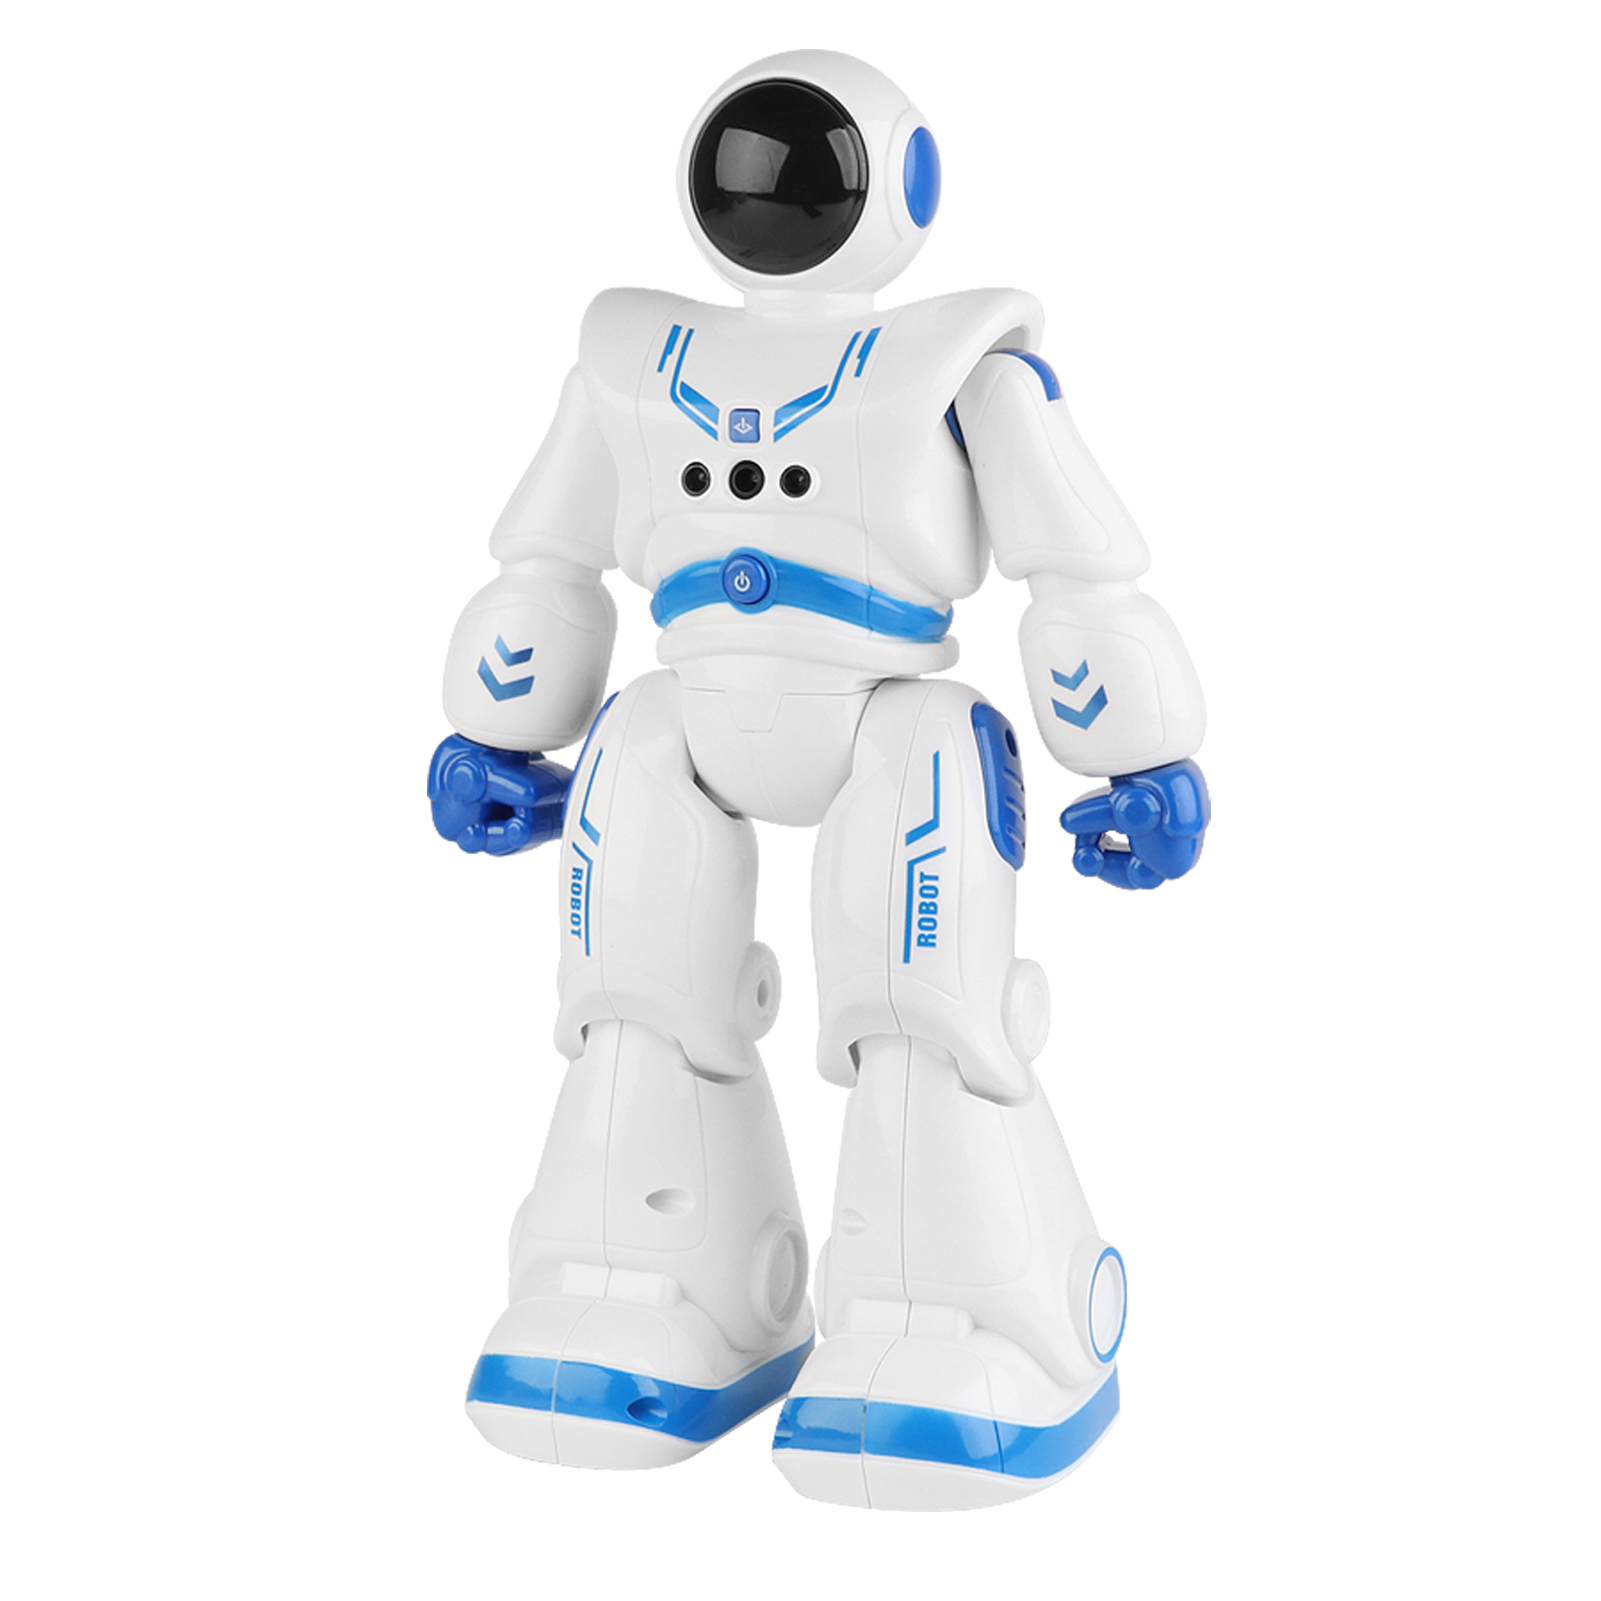 Dcenta Smart Intelligent Robot Toy (Blue and White) - image 7 of 7